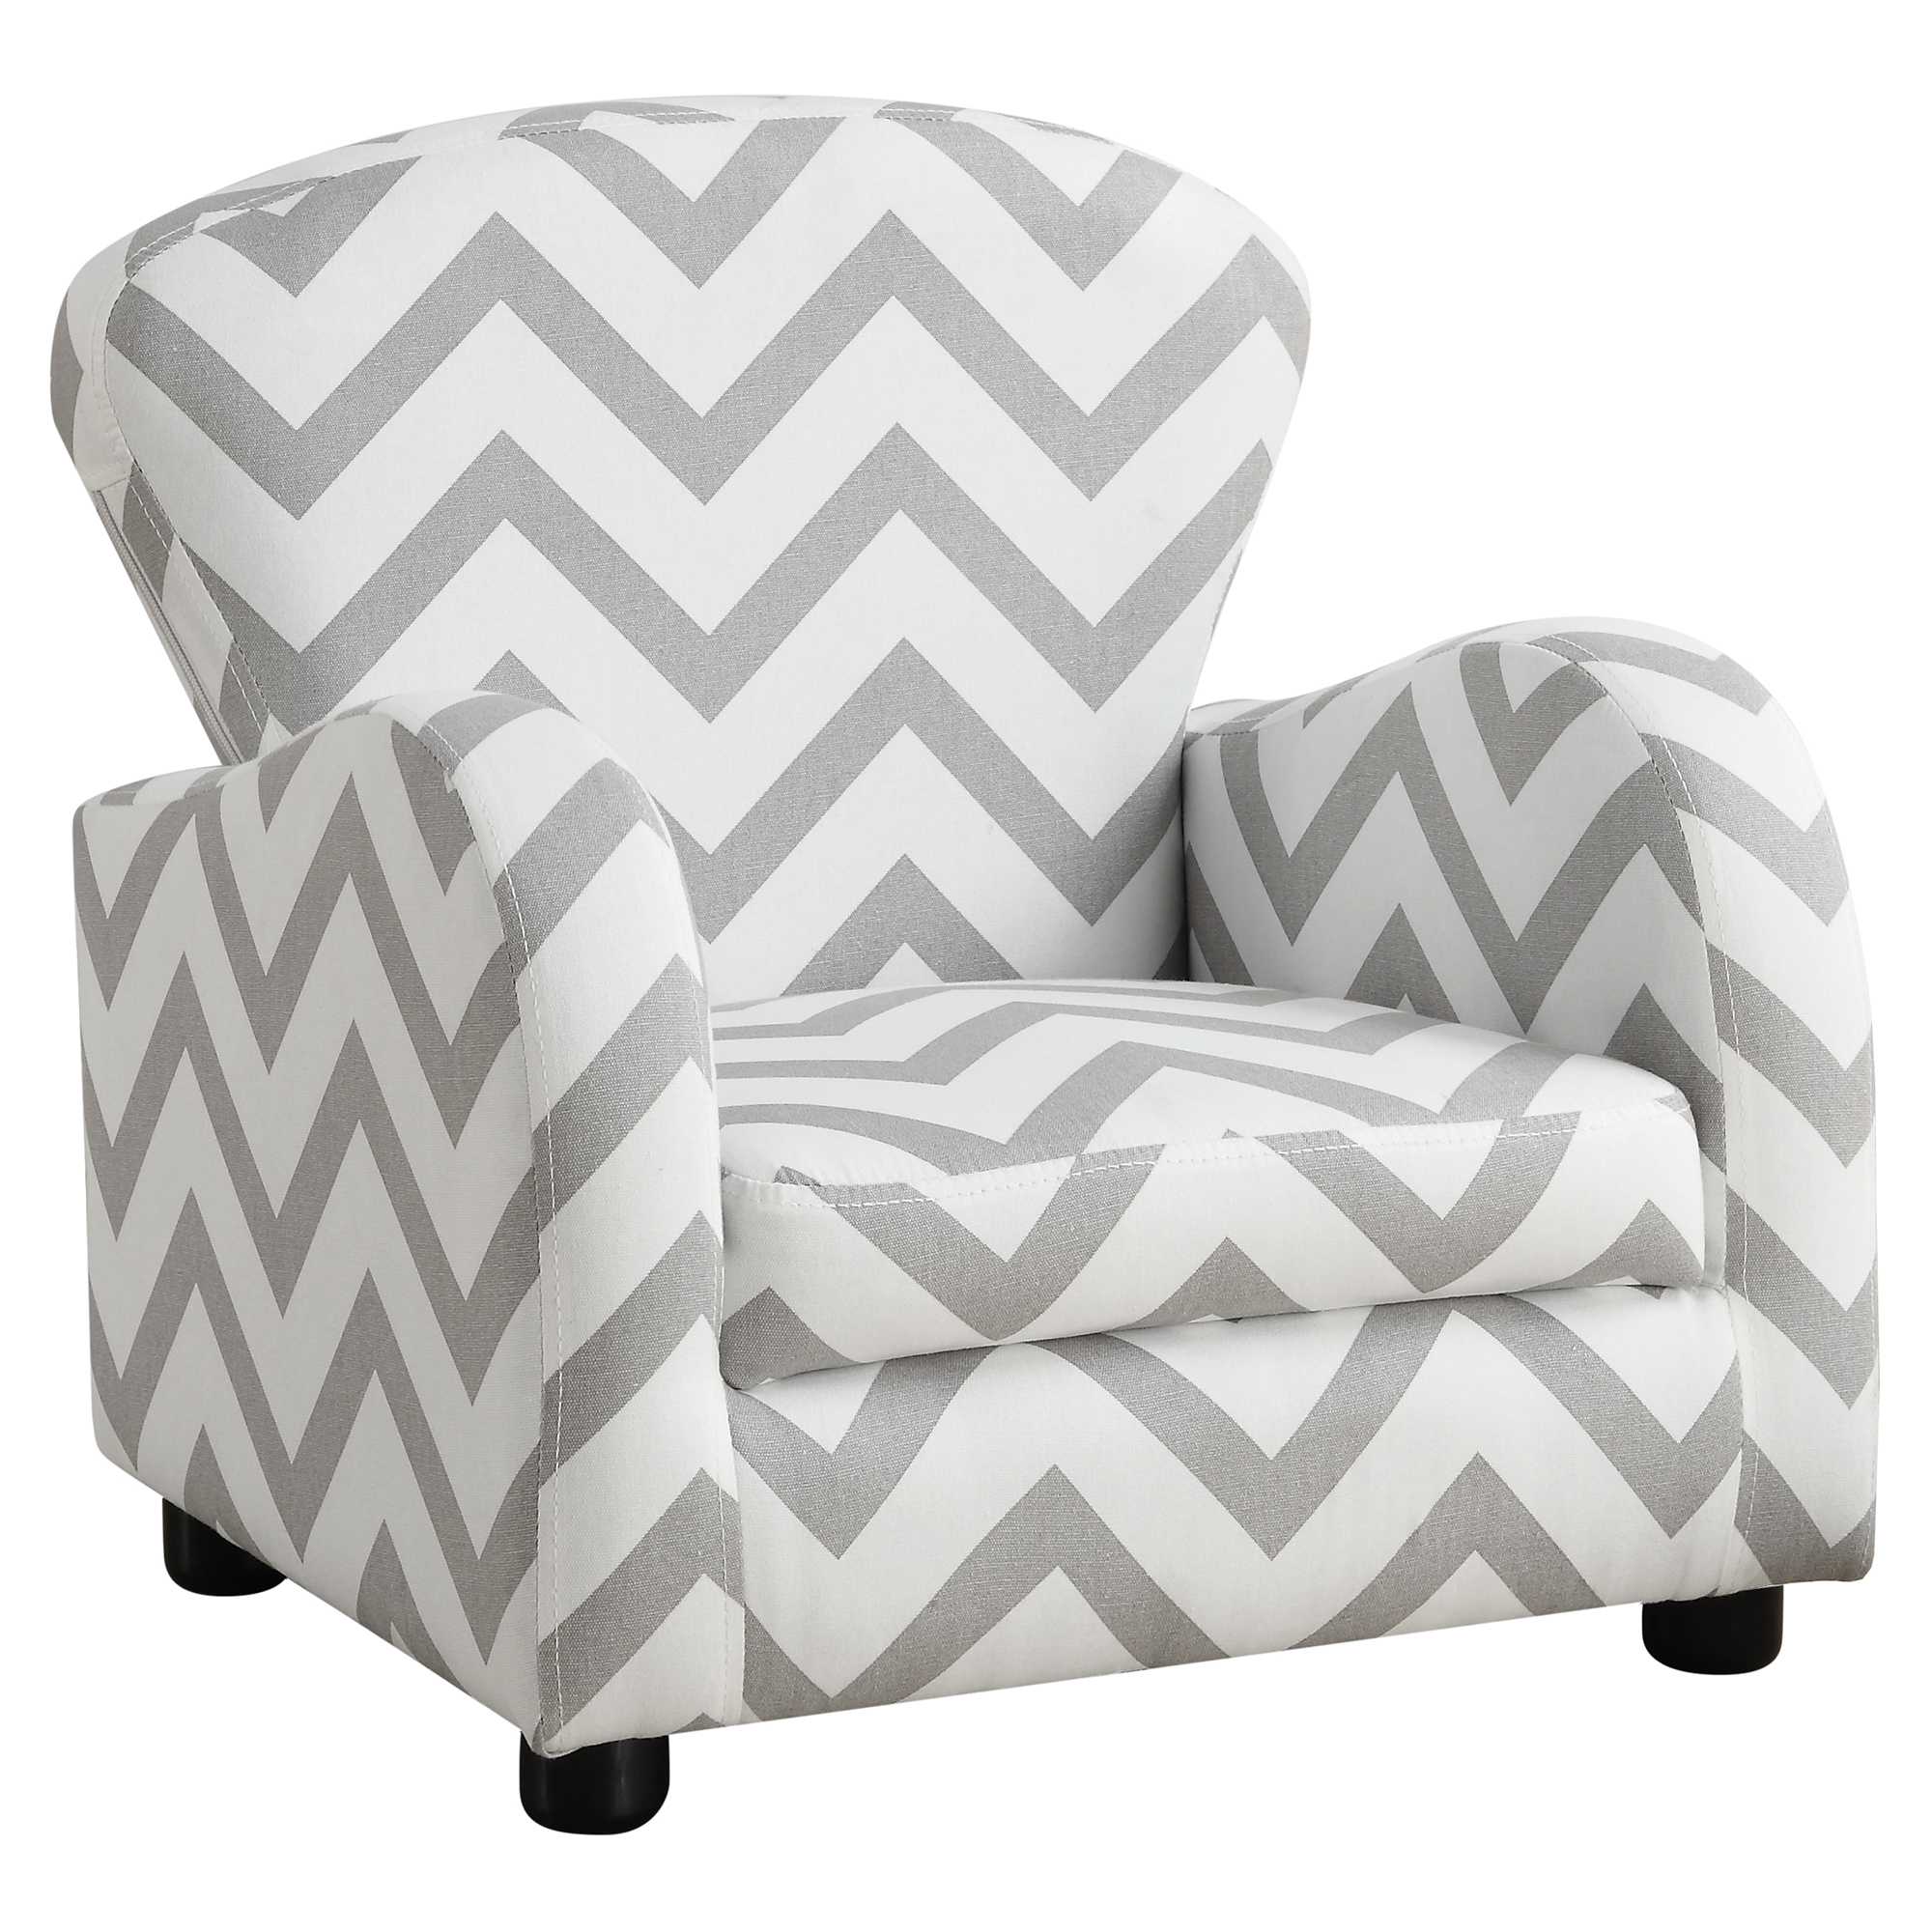 18.5" x 20" x 20" Grey and White Cotton Polyester Chair